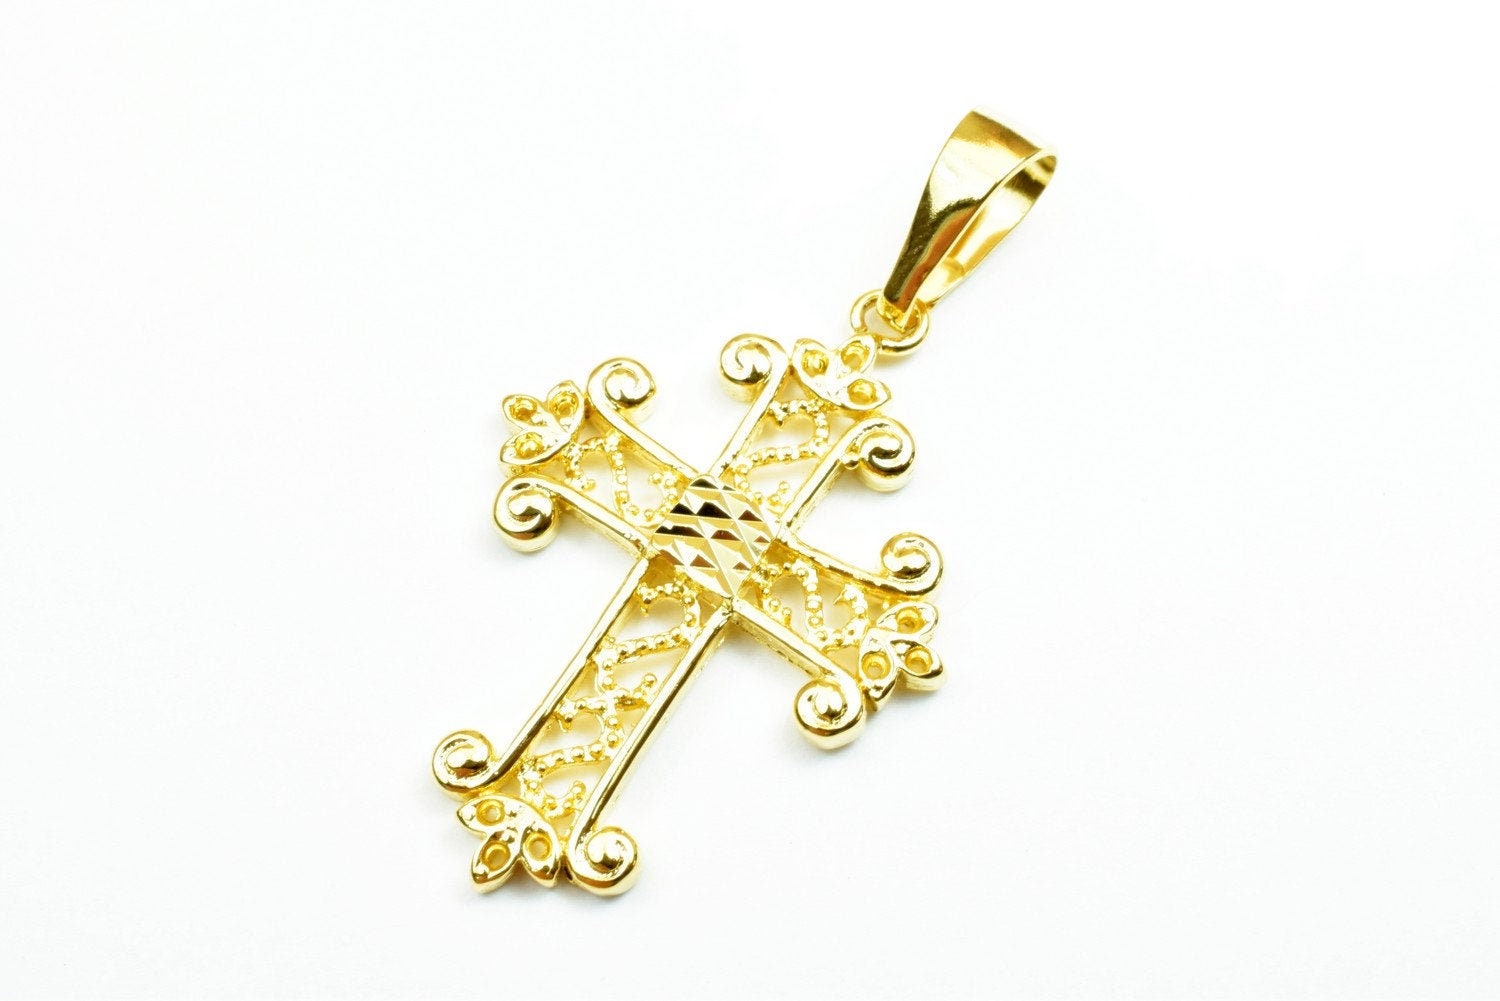 18K as Gold Filled* Filigree Cross Pendants Size 40x28mm, Christian Religious Cross Charm, First Communion Baby Baptism For Jewelry Making